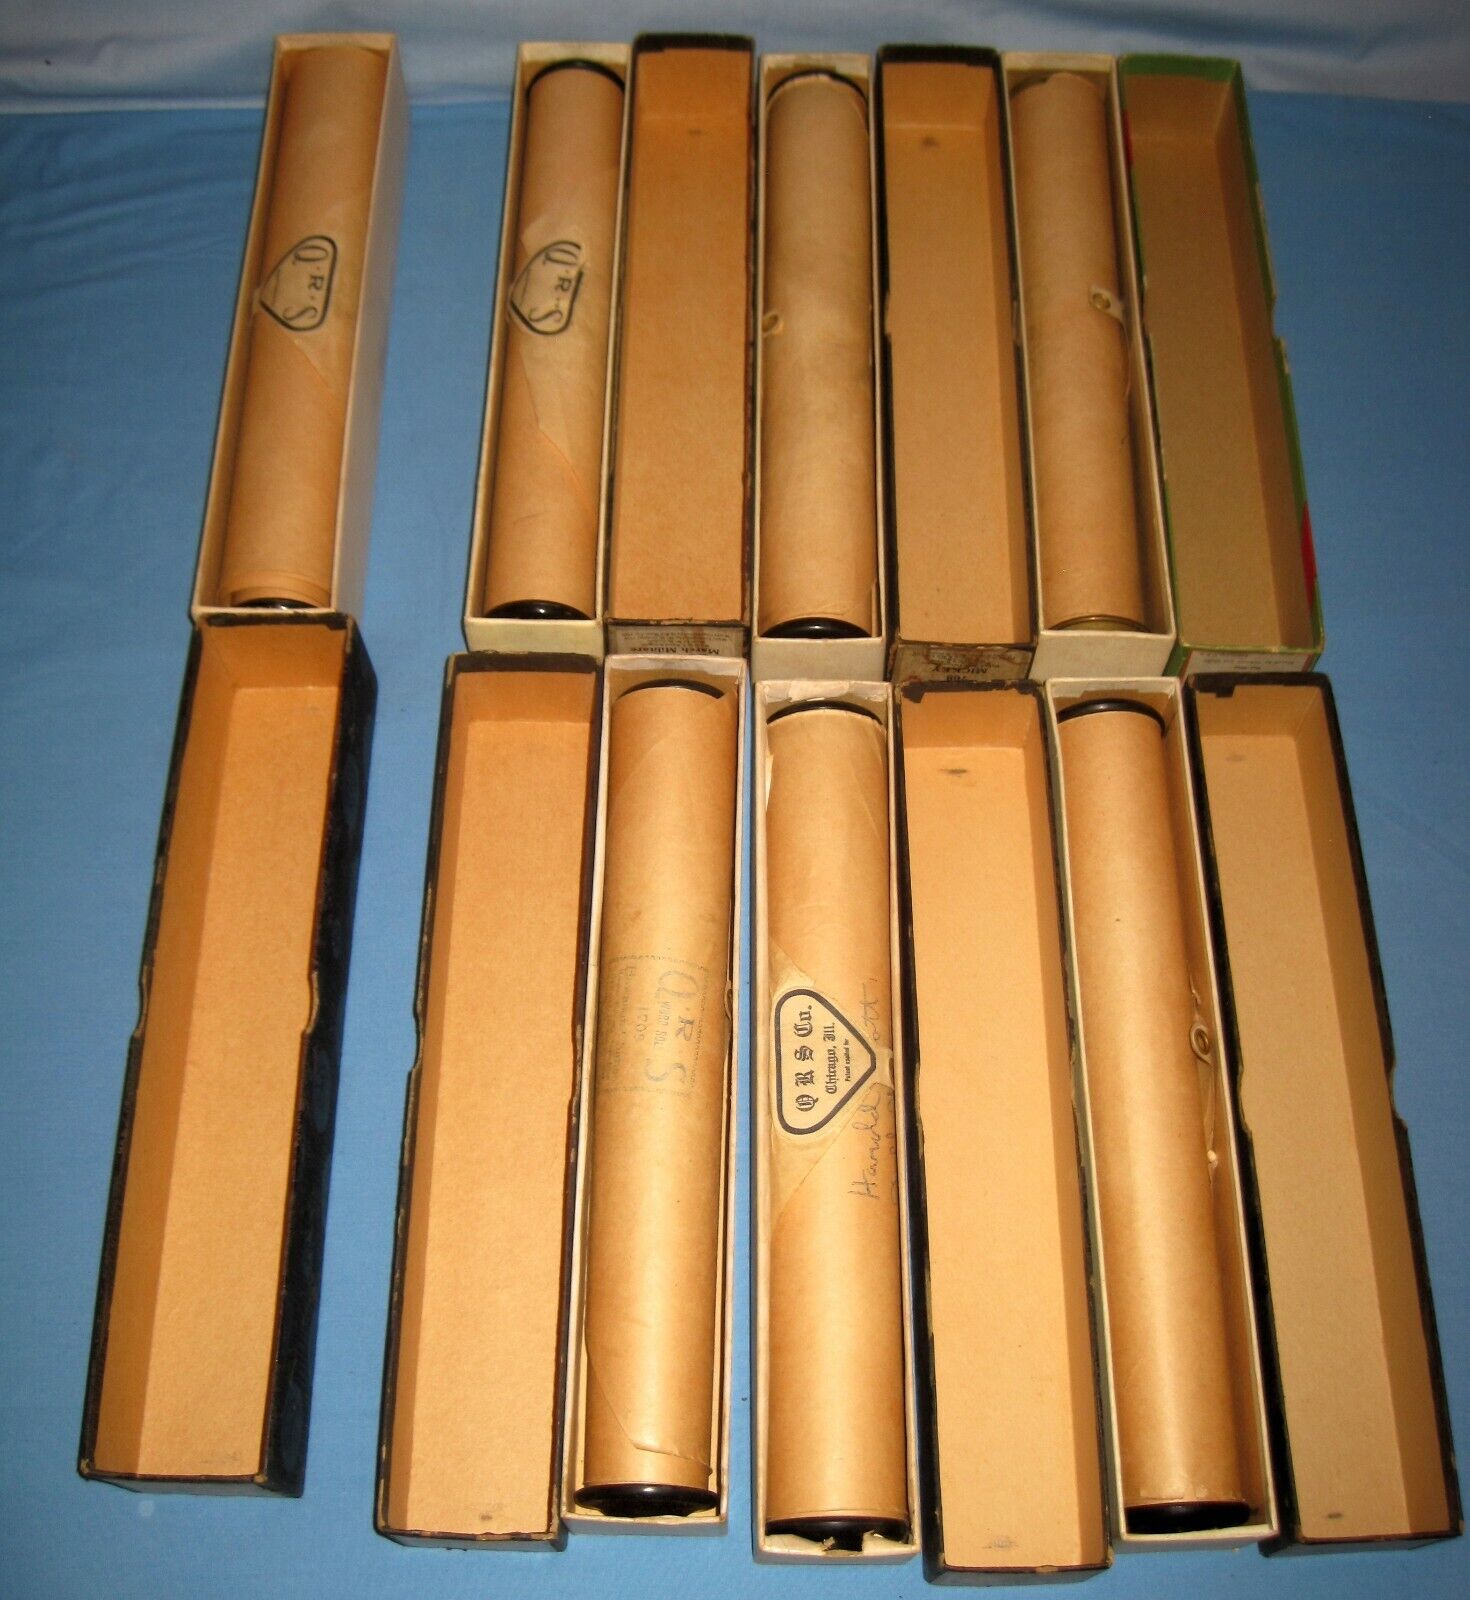 VTG/Antique Lot 20 Player Piano Rolls Music Songs ORS/Vocal Style/US/Imperial ++ Assorted - фотография #8